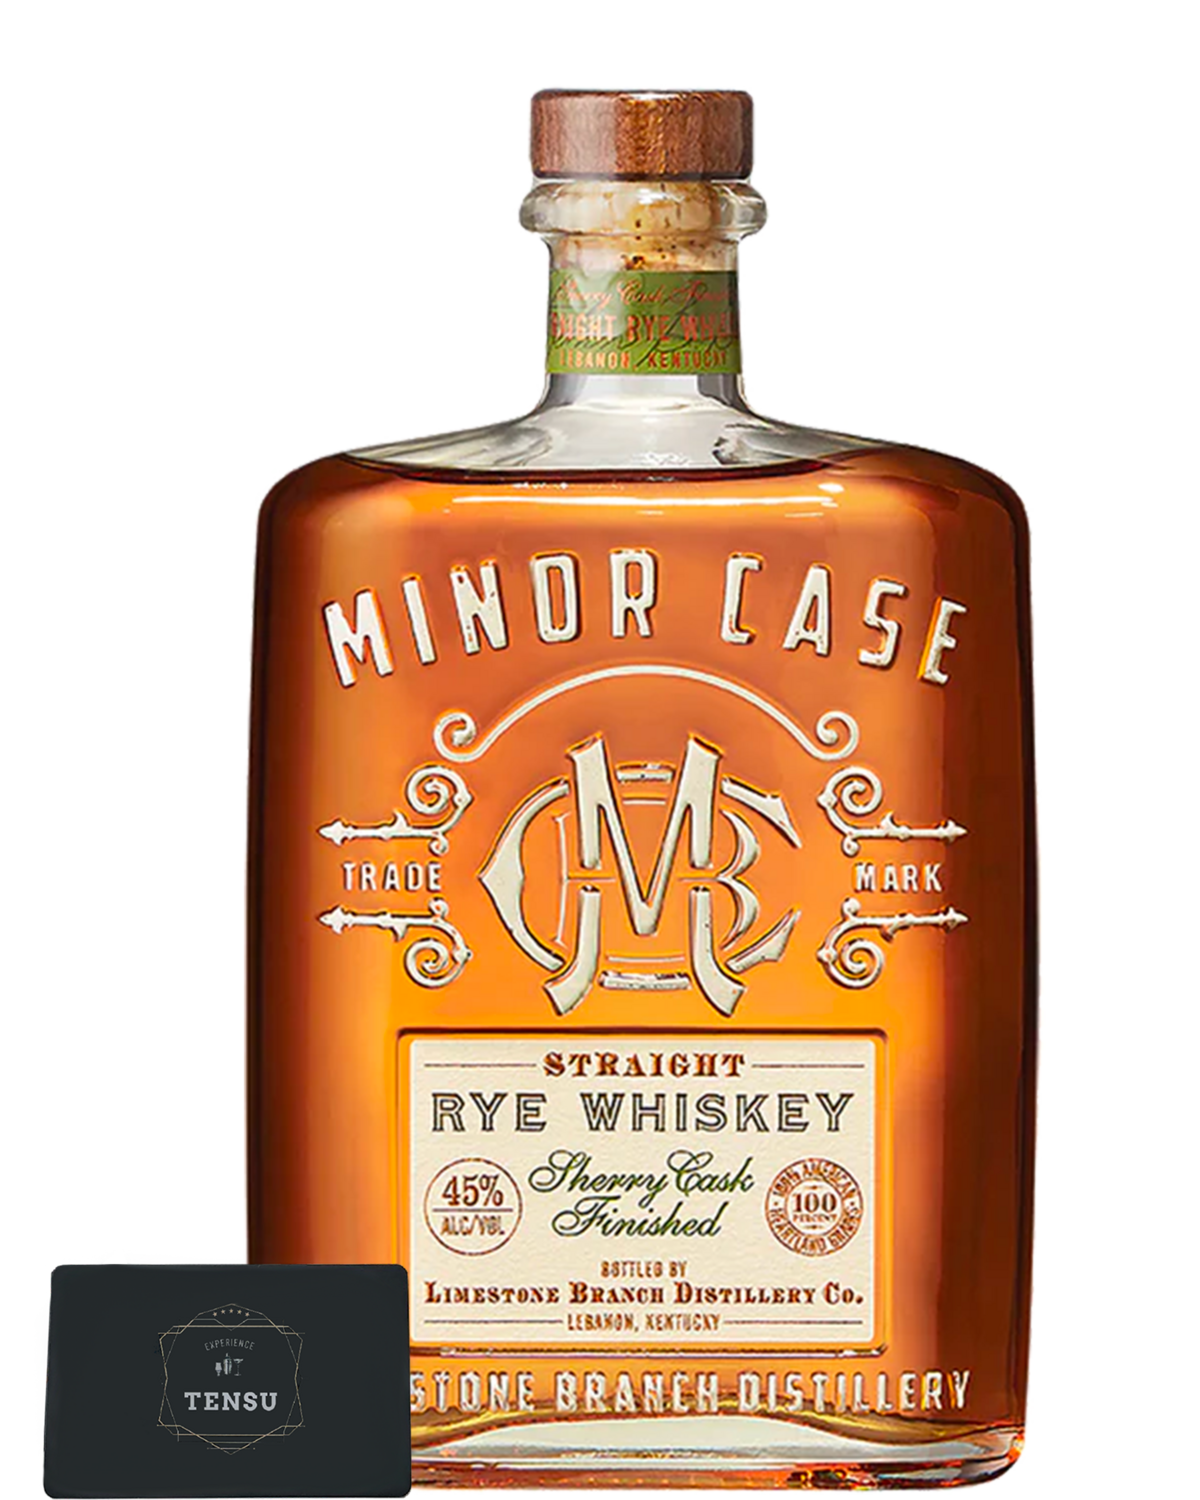 Minor Case -Straight Rye Whiskey- Sherry Cask Finish 45.0 &quot;OB&quot;